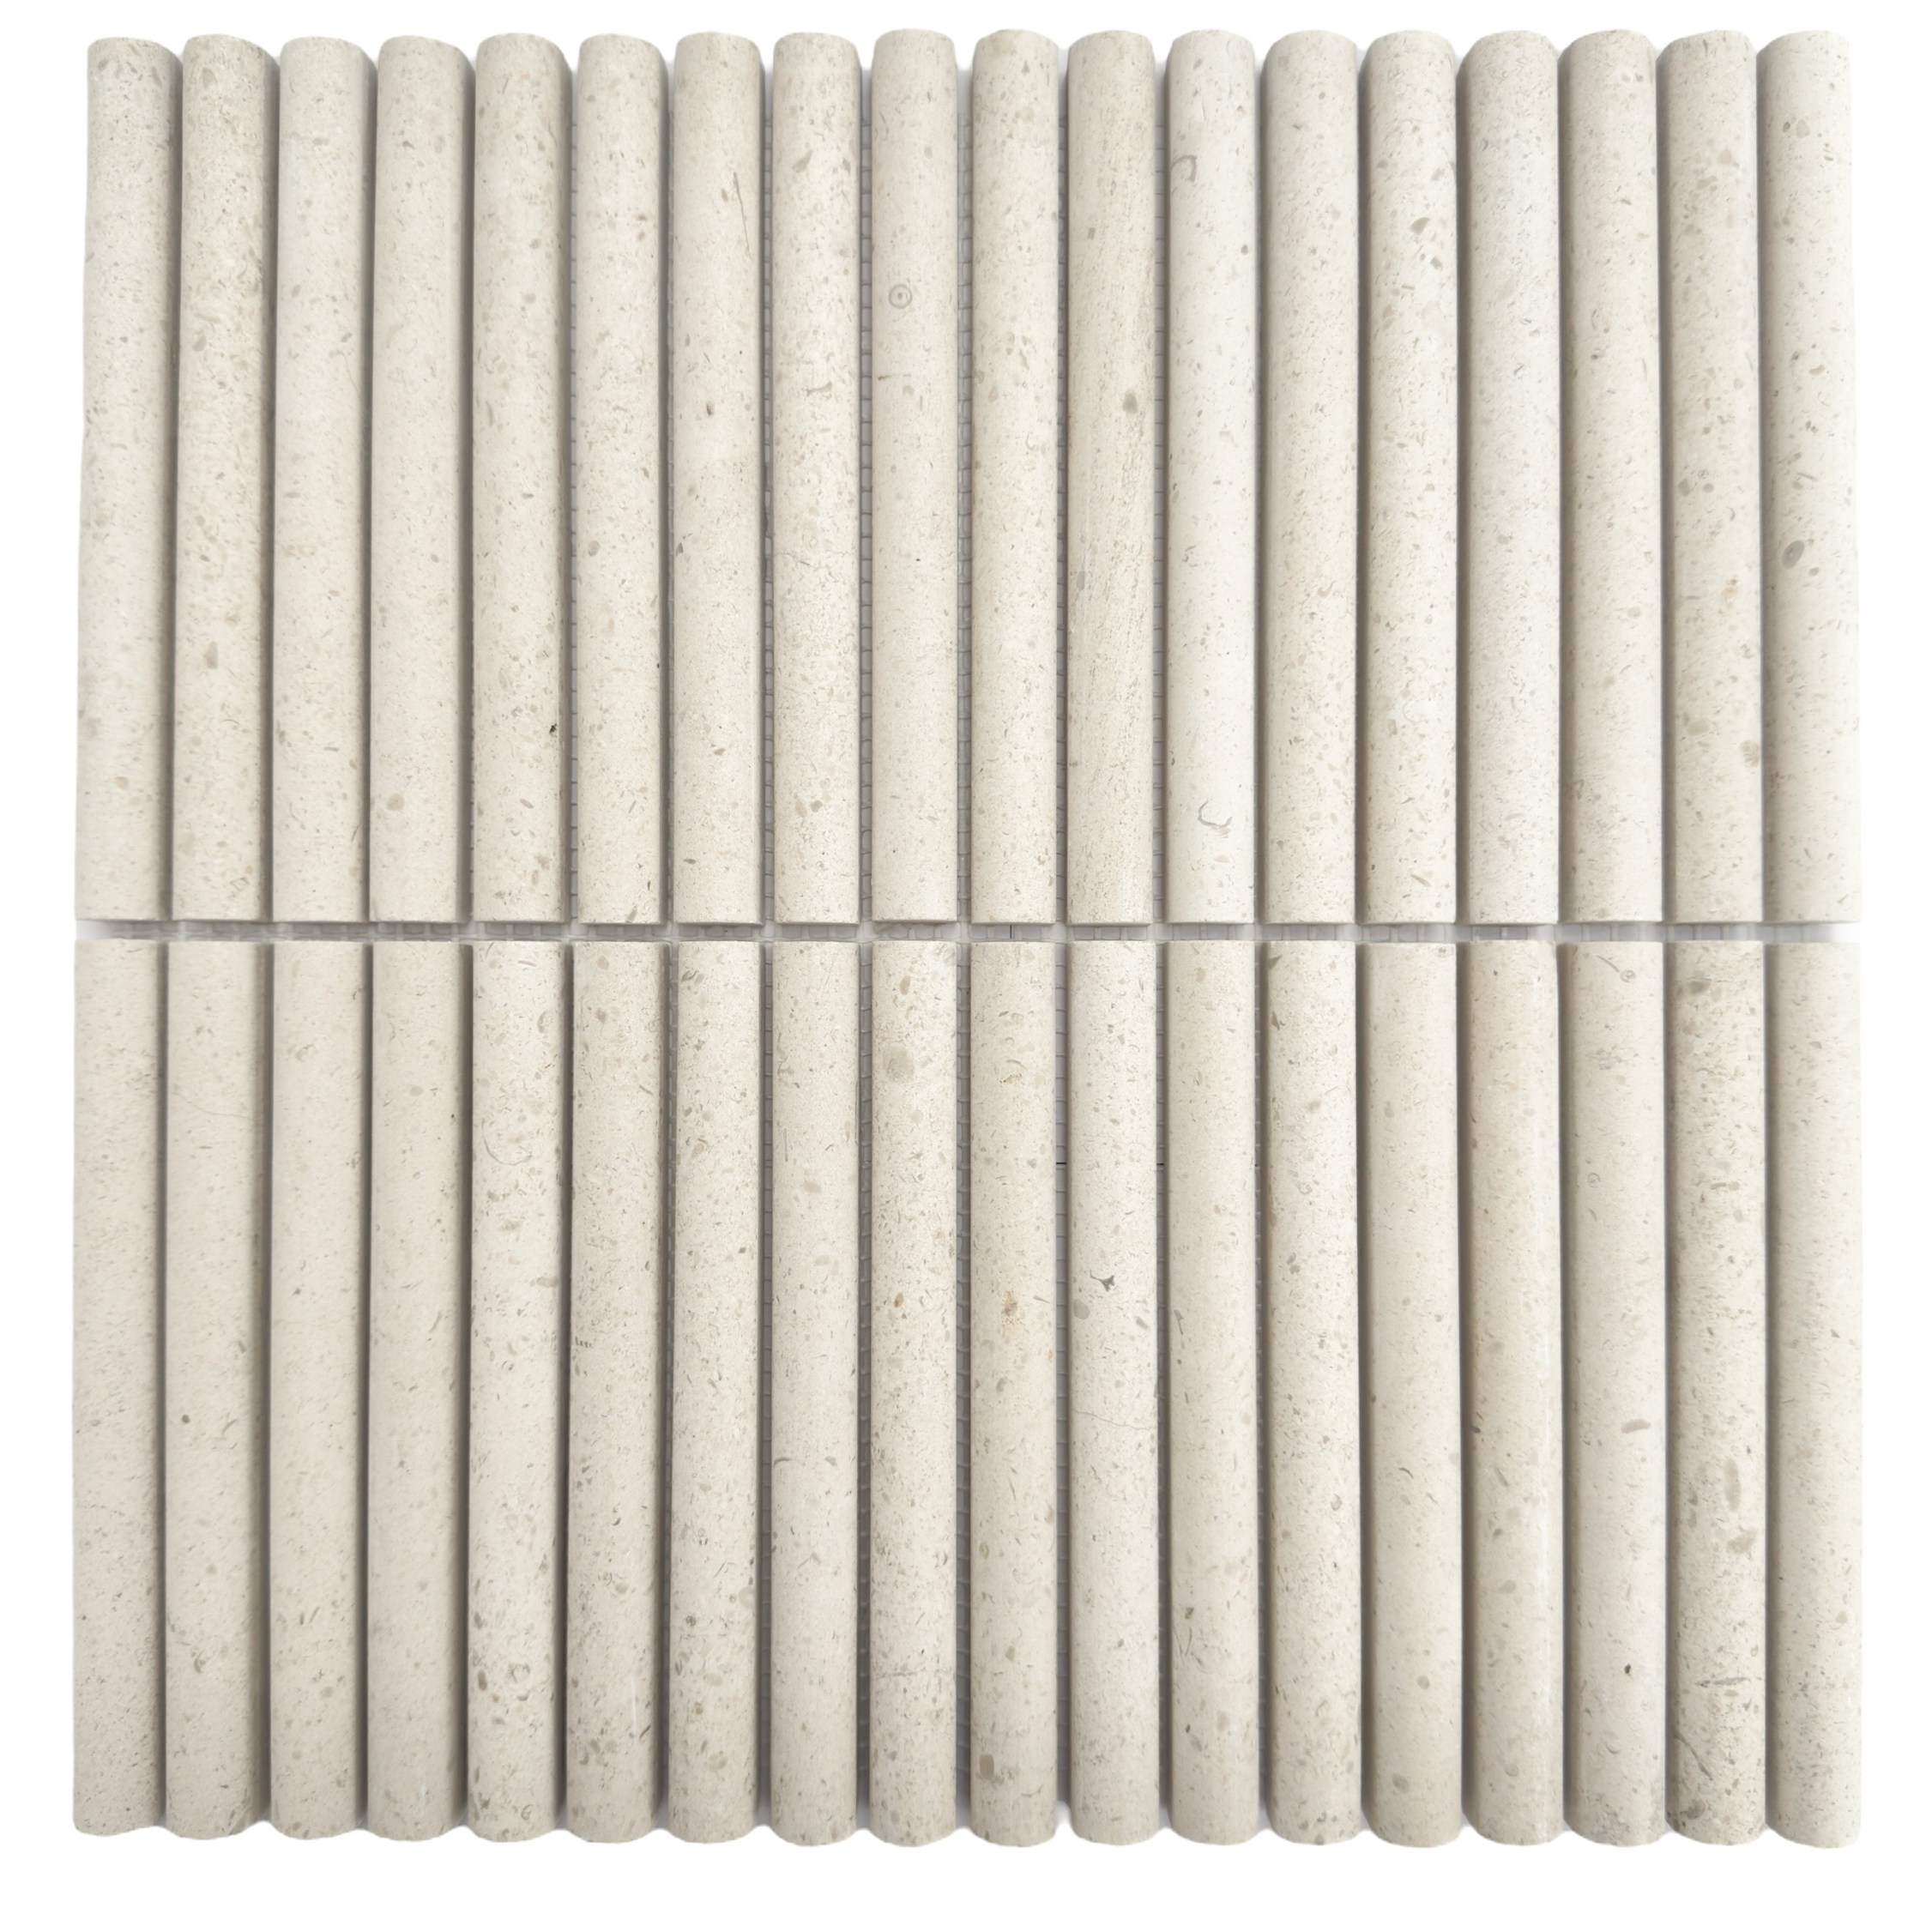 MINI BAMBOO PORTUGAL HONED CHIP SIZE 15X151X15MM